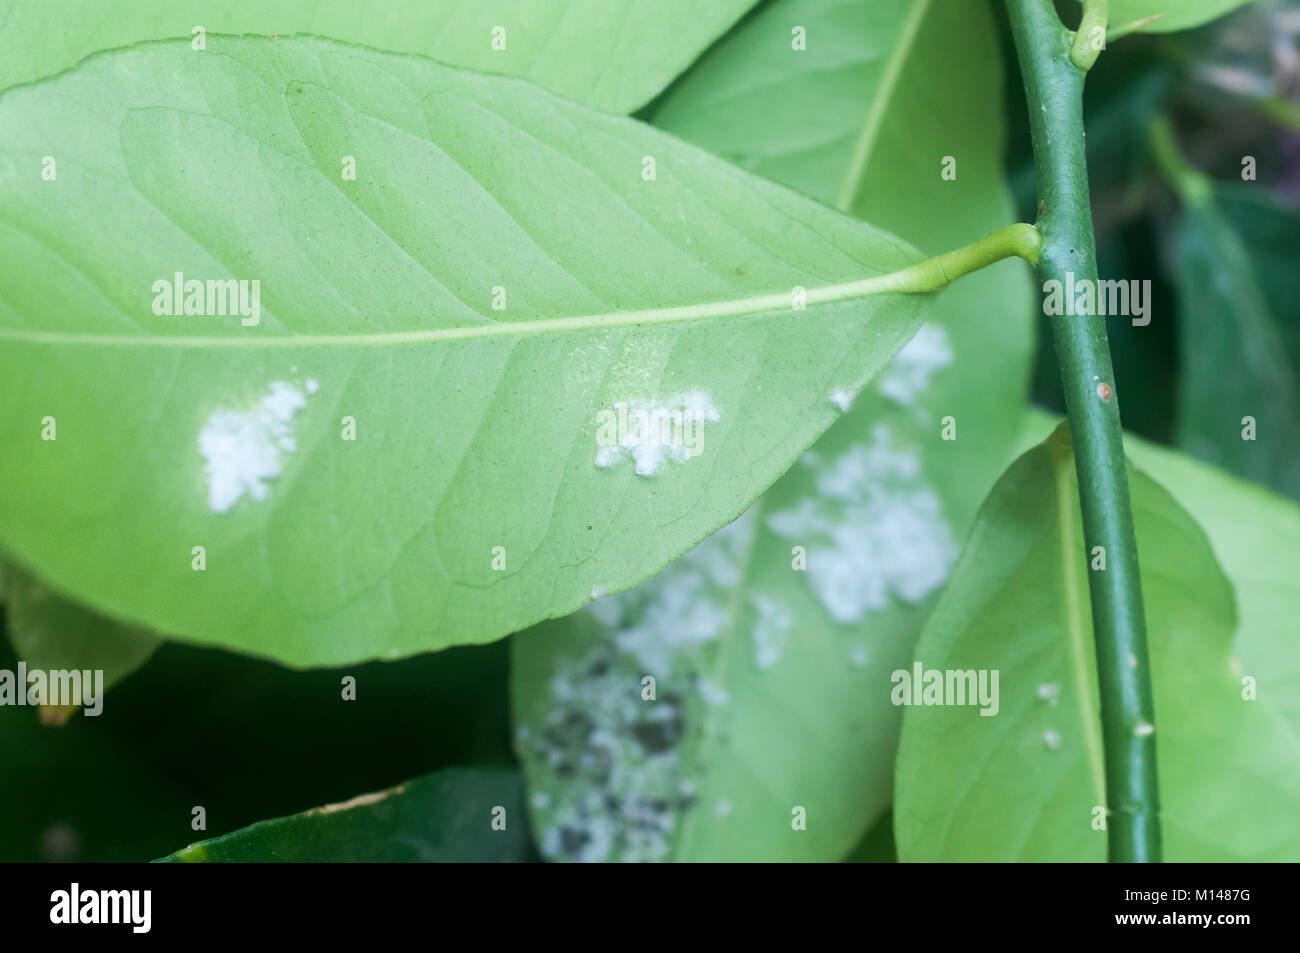 Mealy bugs on a leaf. Cluster of mealy bugs (Pseudococcidae) on the underside of a lemon tree leaf. Photographed in Israel Stock Photo